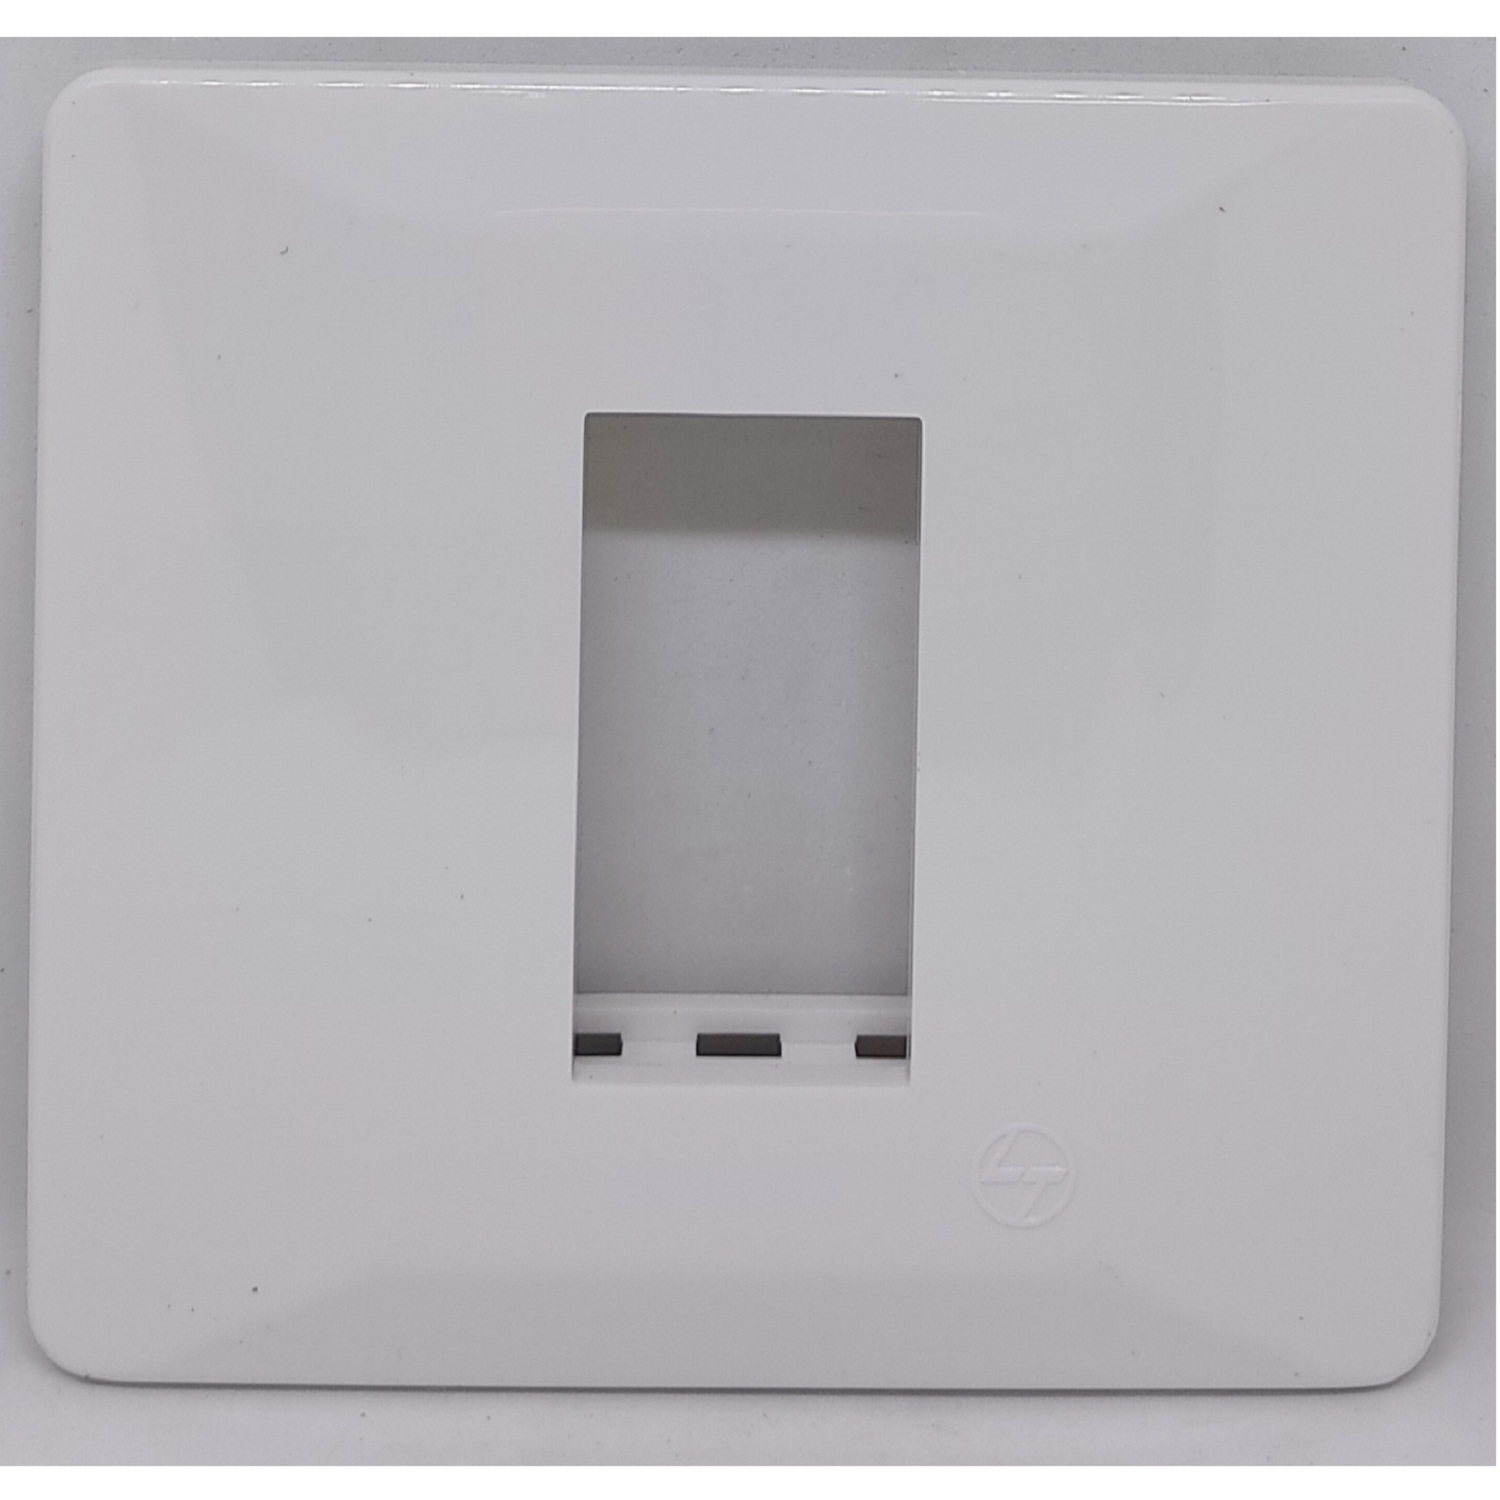 LT Entice 1 Module (Regular) Cover Plate with Base Frame - White